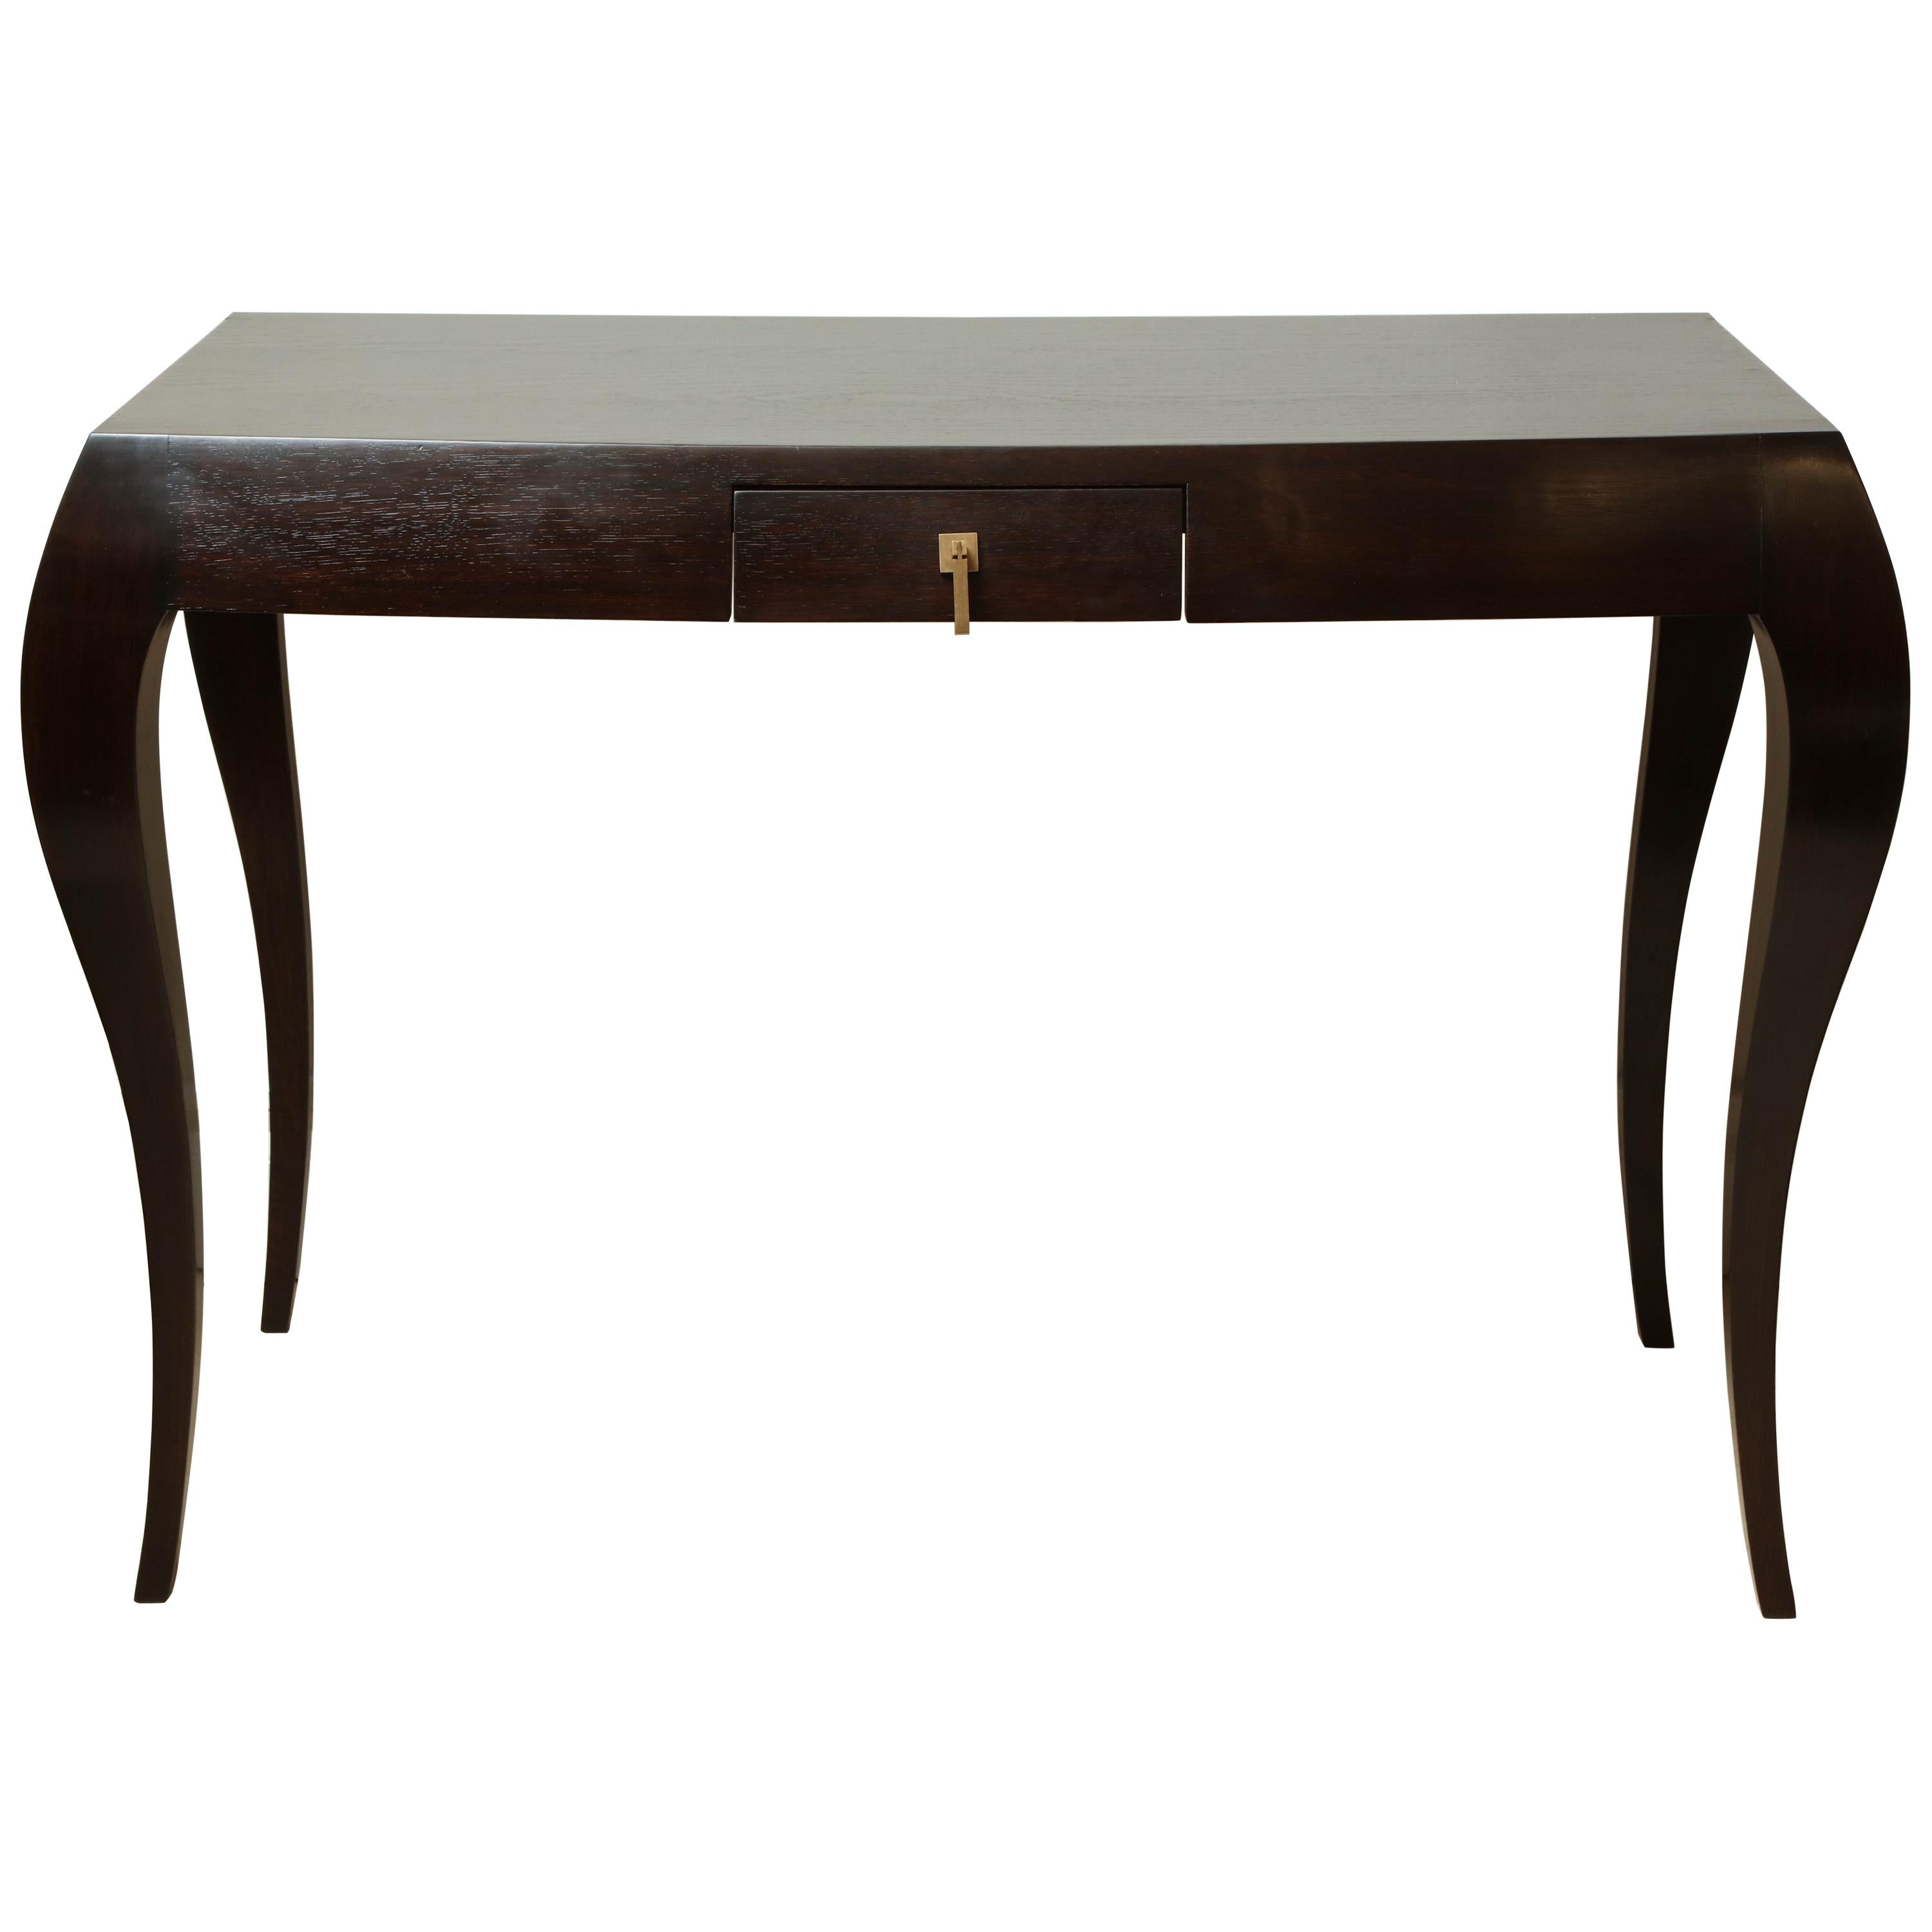 Dark Oak Console Table with Curved Legs and Single Drawer, France, circa 1960s For Sale